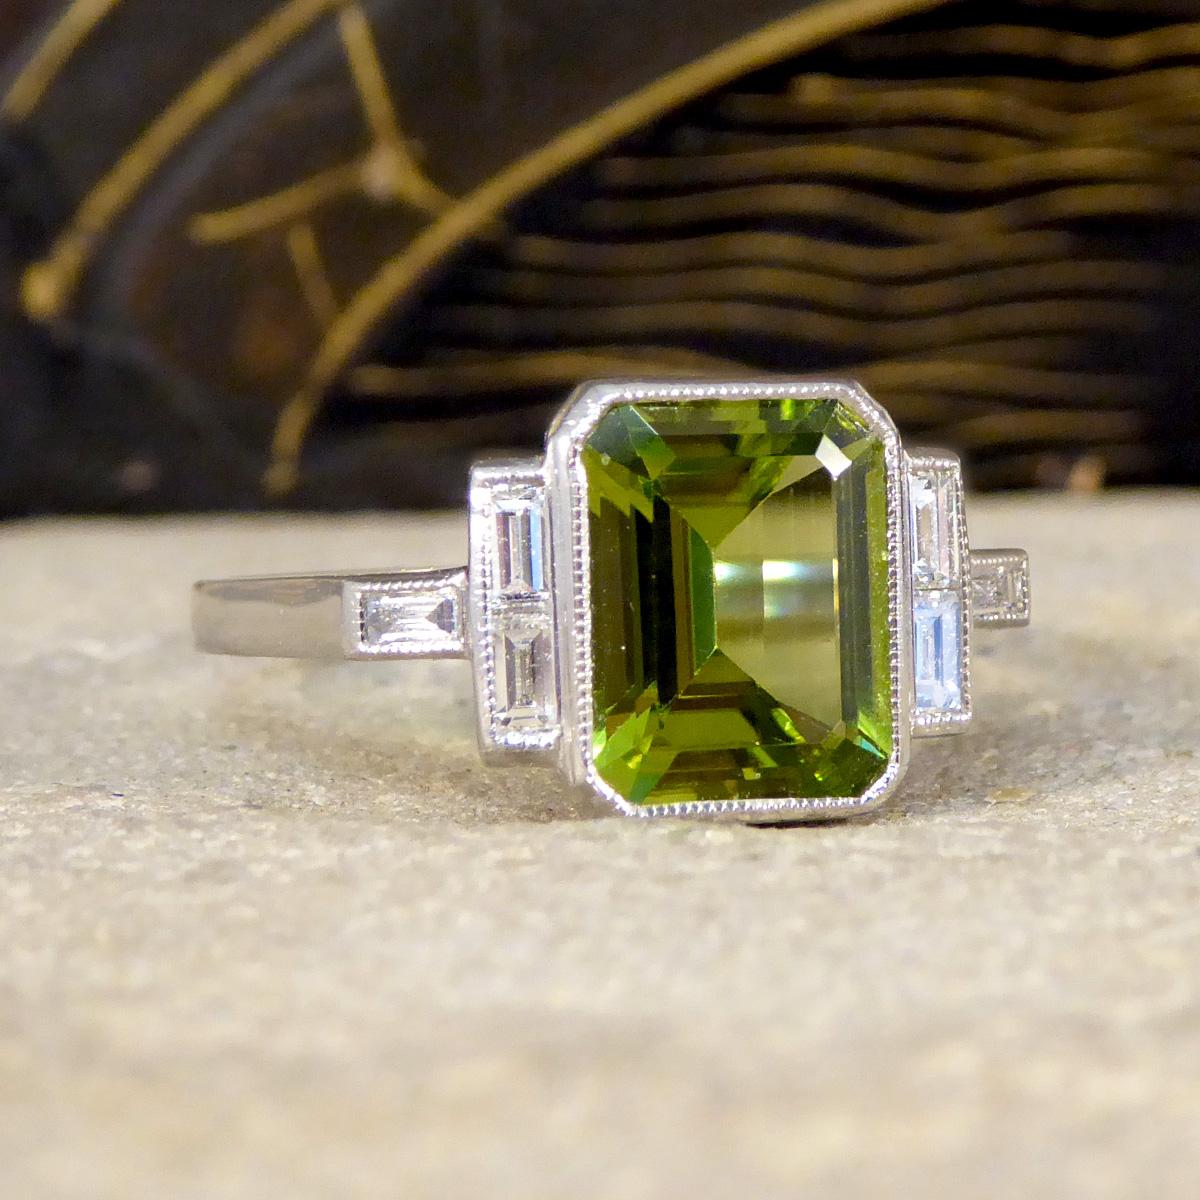 Introducing our Art Deco-inspired Peridot Ring—a harmonious blend of vintage elegance and contemporary flair. Set in the enduring beauty of platinum, this ring features a vibrant Emerald cut peridot as its centre piece weighing 2.30ct, capturing the